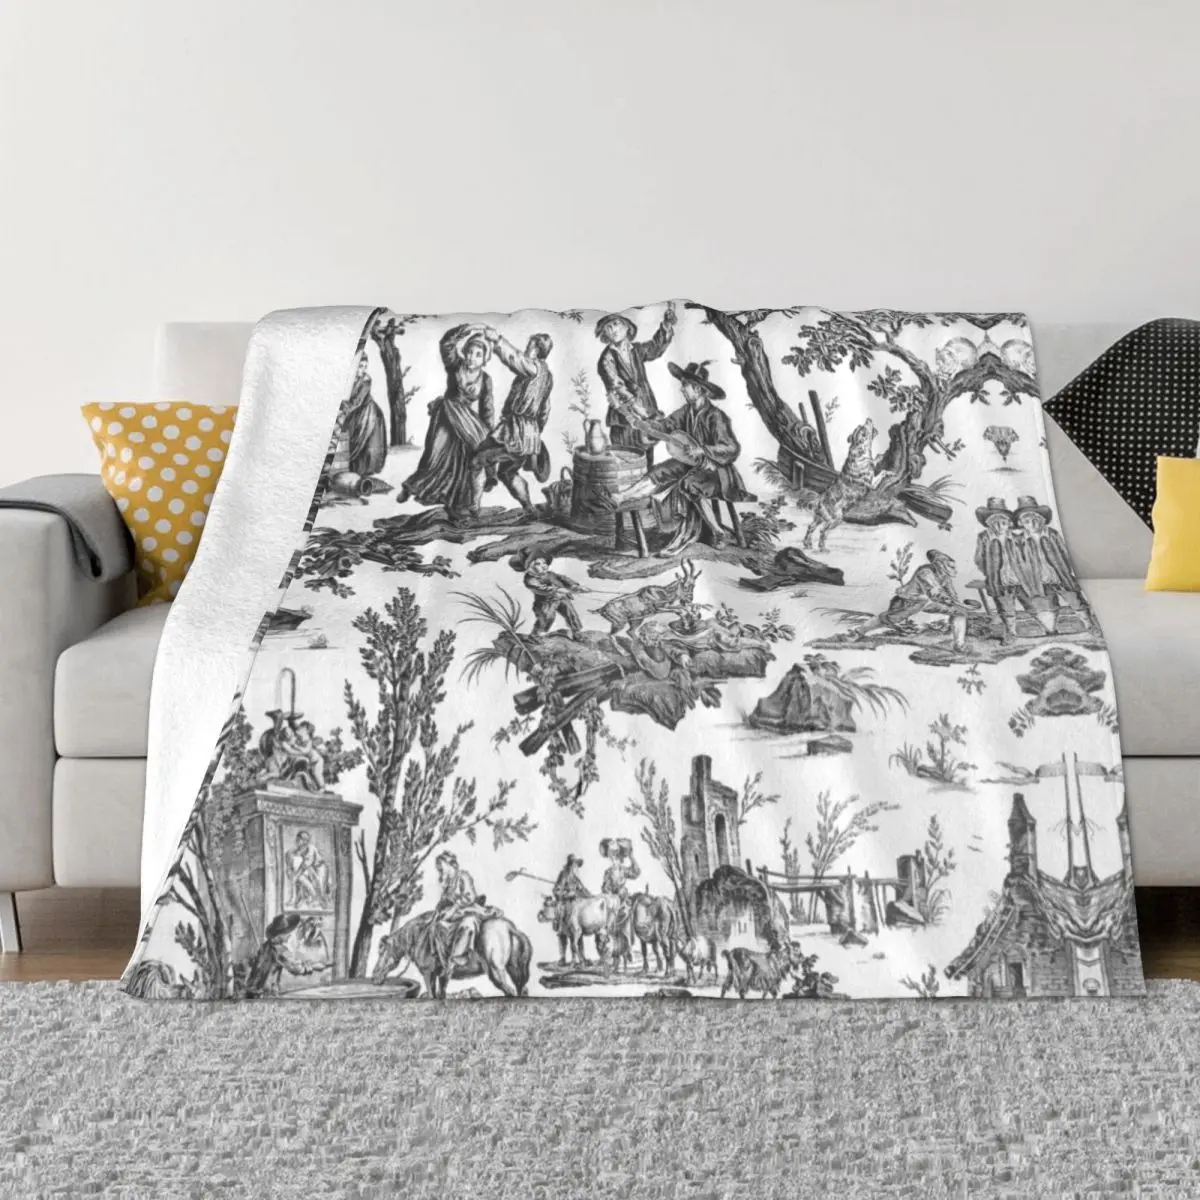 

Black and White Toile De Jouy Blanket Soft Fleece Warm Flannel French Motifs Floral Throw Blanket for Sofa Office Bed Quilt Gift